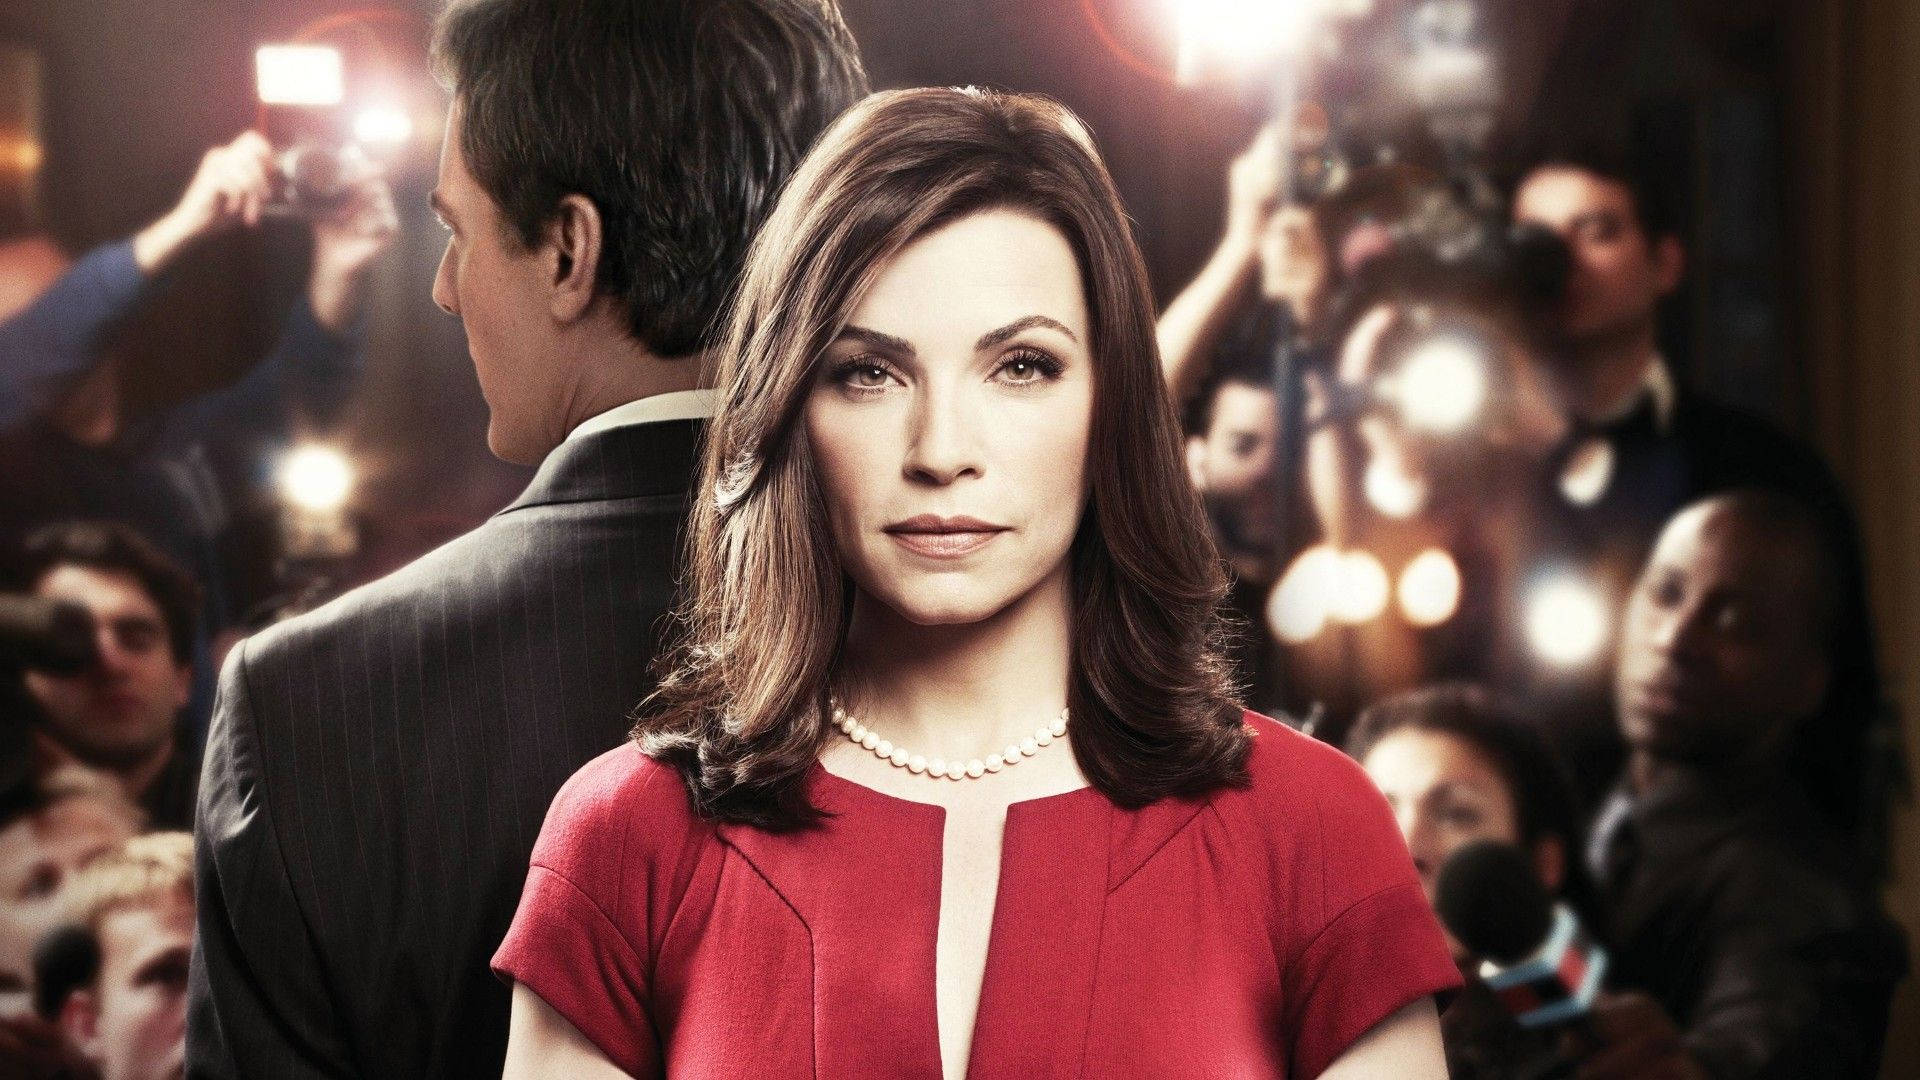 Julianna Margulies in a Memorable Scene from The Good Wife Wallpaper